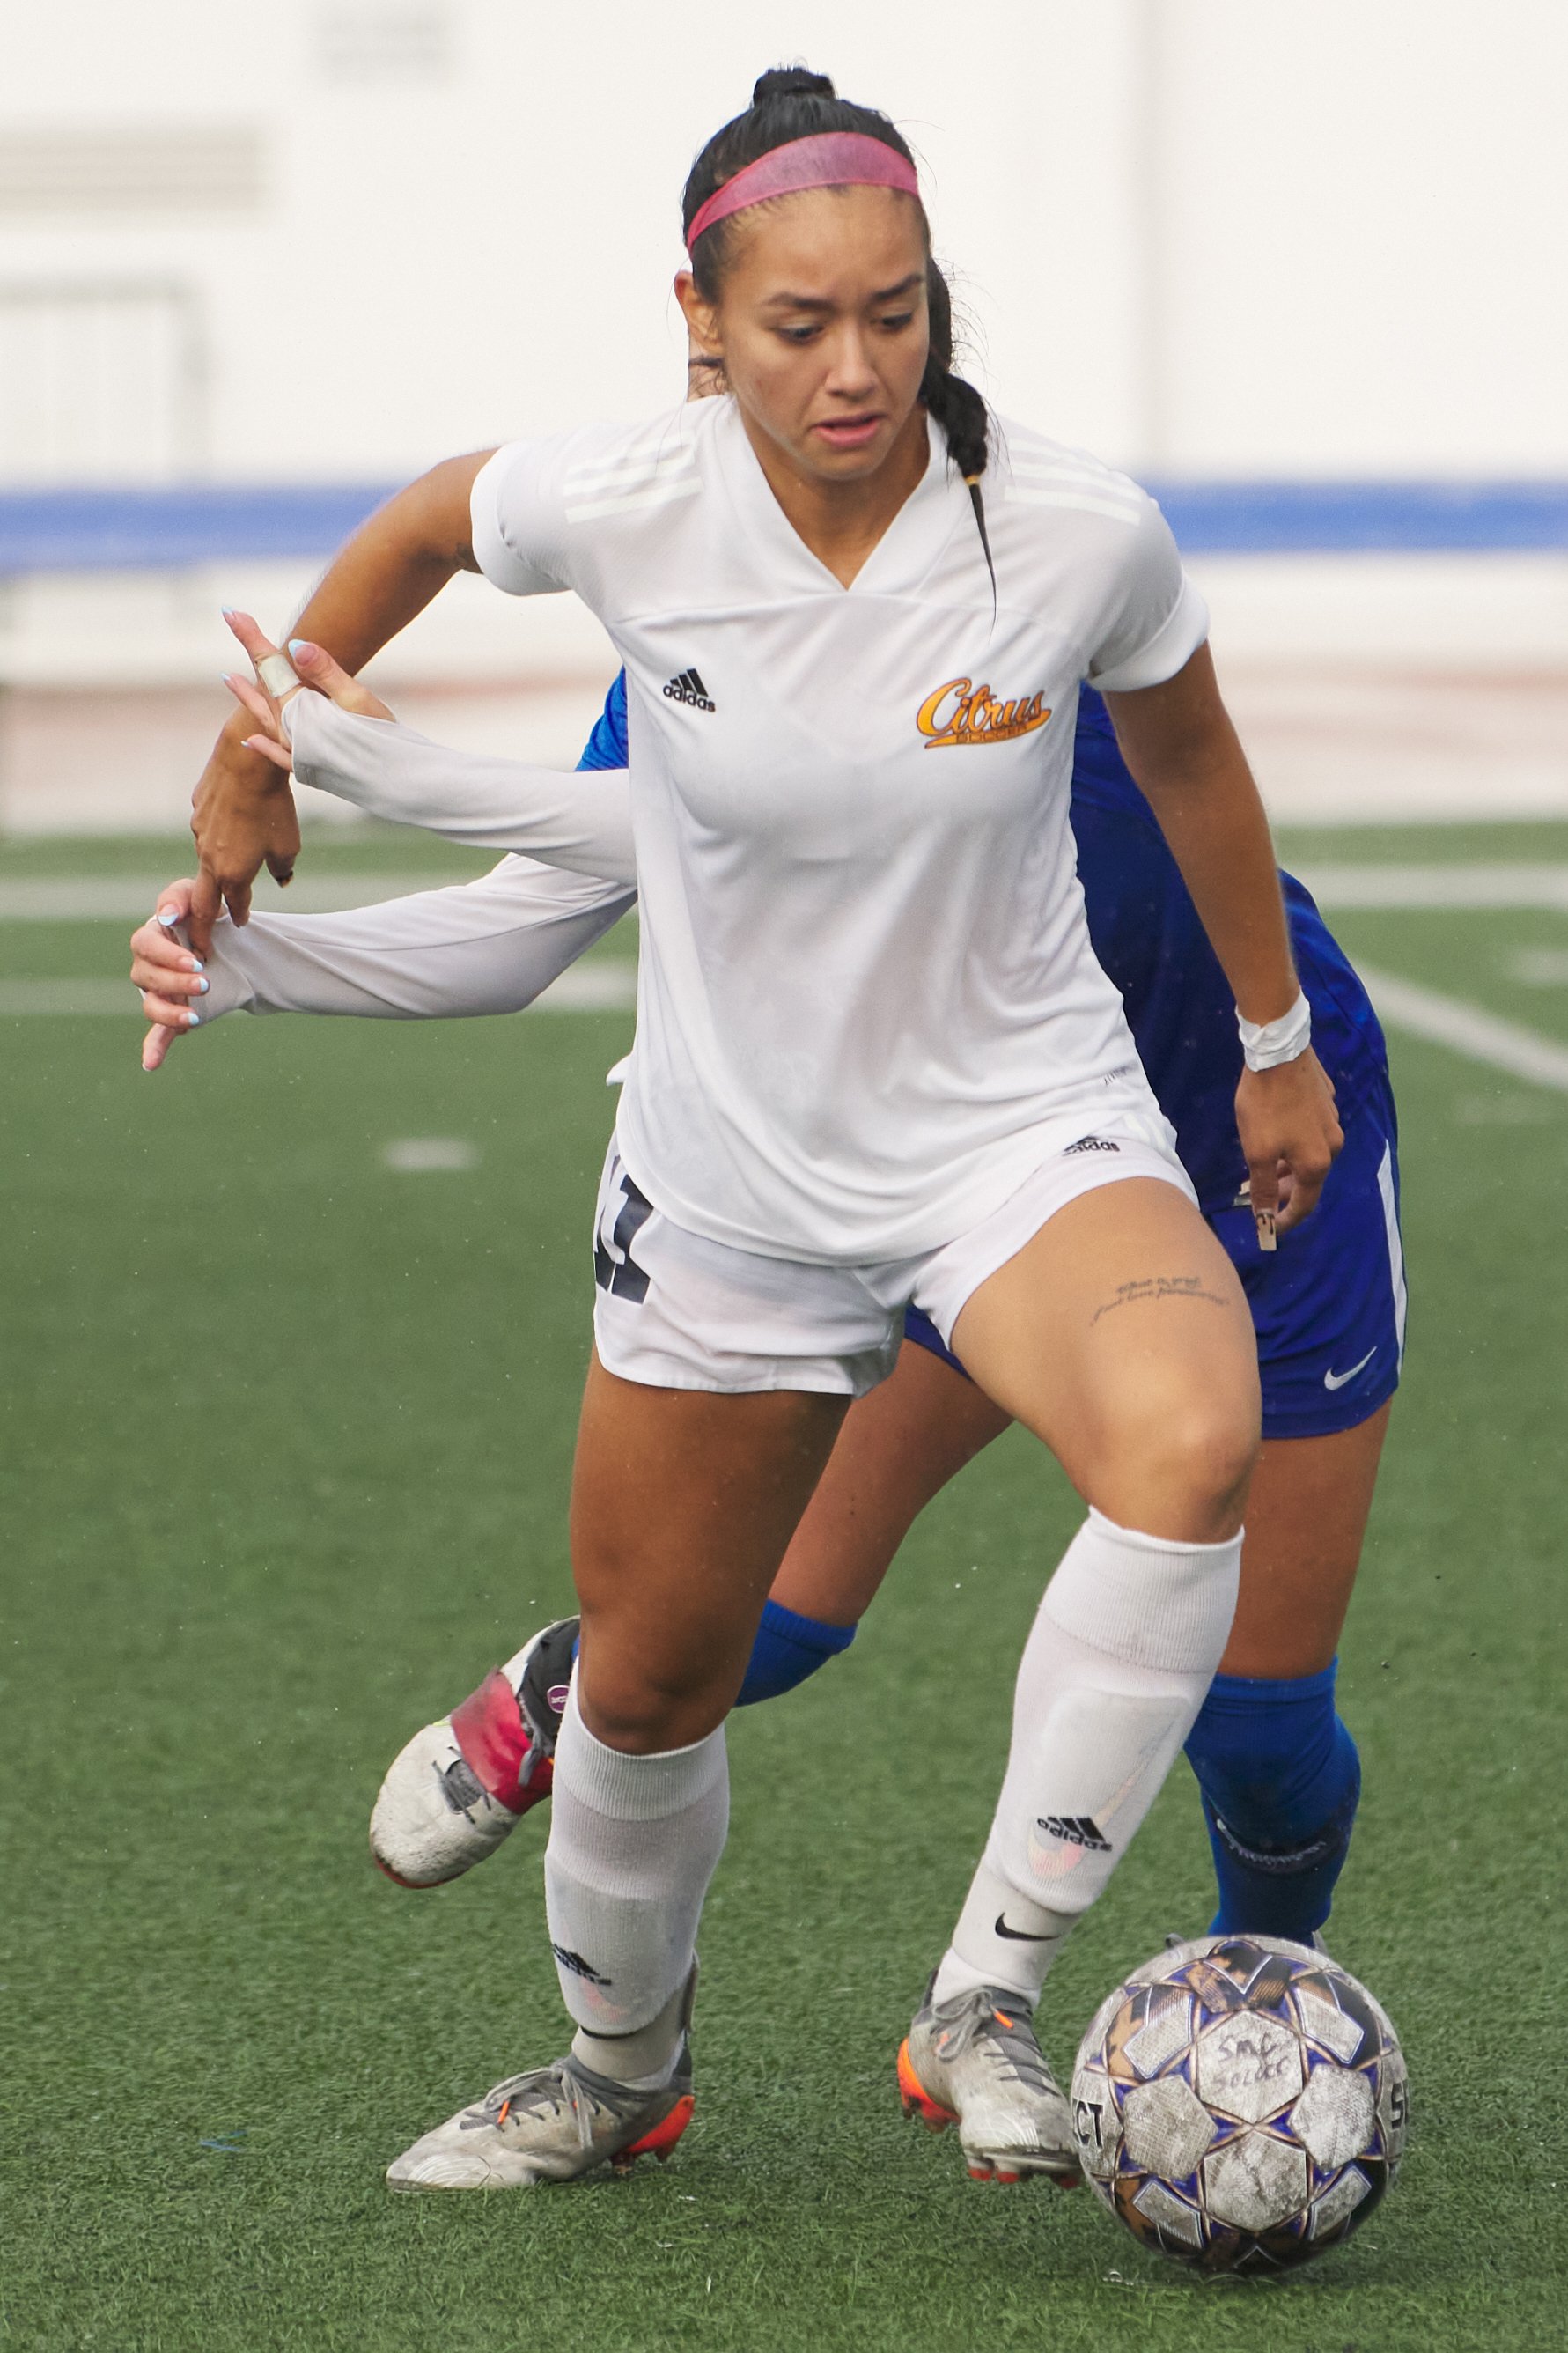  Santa Monica College Corsairs' Ali Alban (rear) attempts to ensnare Citrus College Owls' Janelle Alvarado's arm during the women's soccer match on Tuesday, Nov. 8, 2022, at Corsair Field in Santa Monica, Calif. The Corsairs won 3-1. (Nicholas McCall